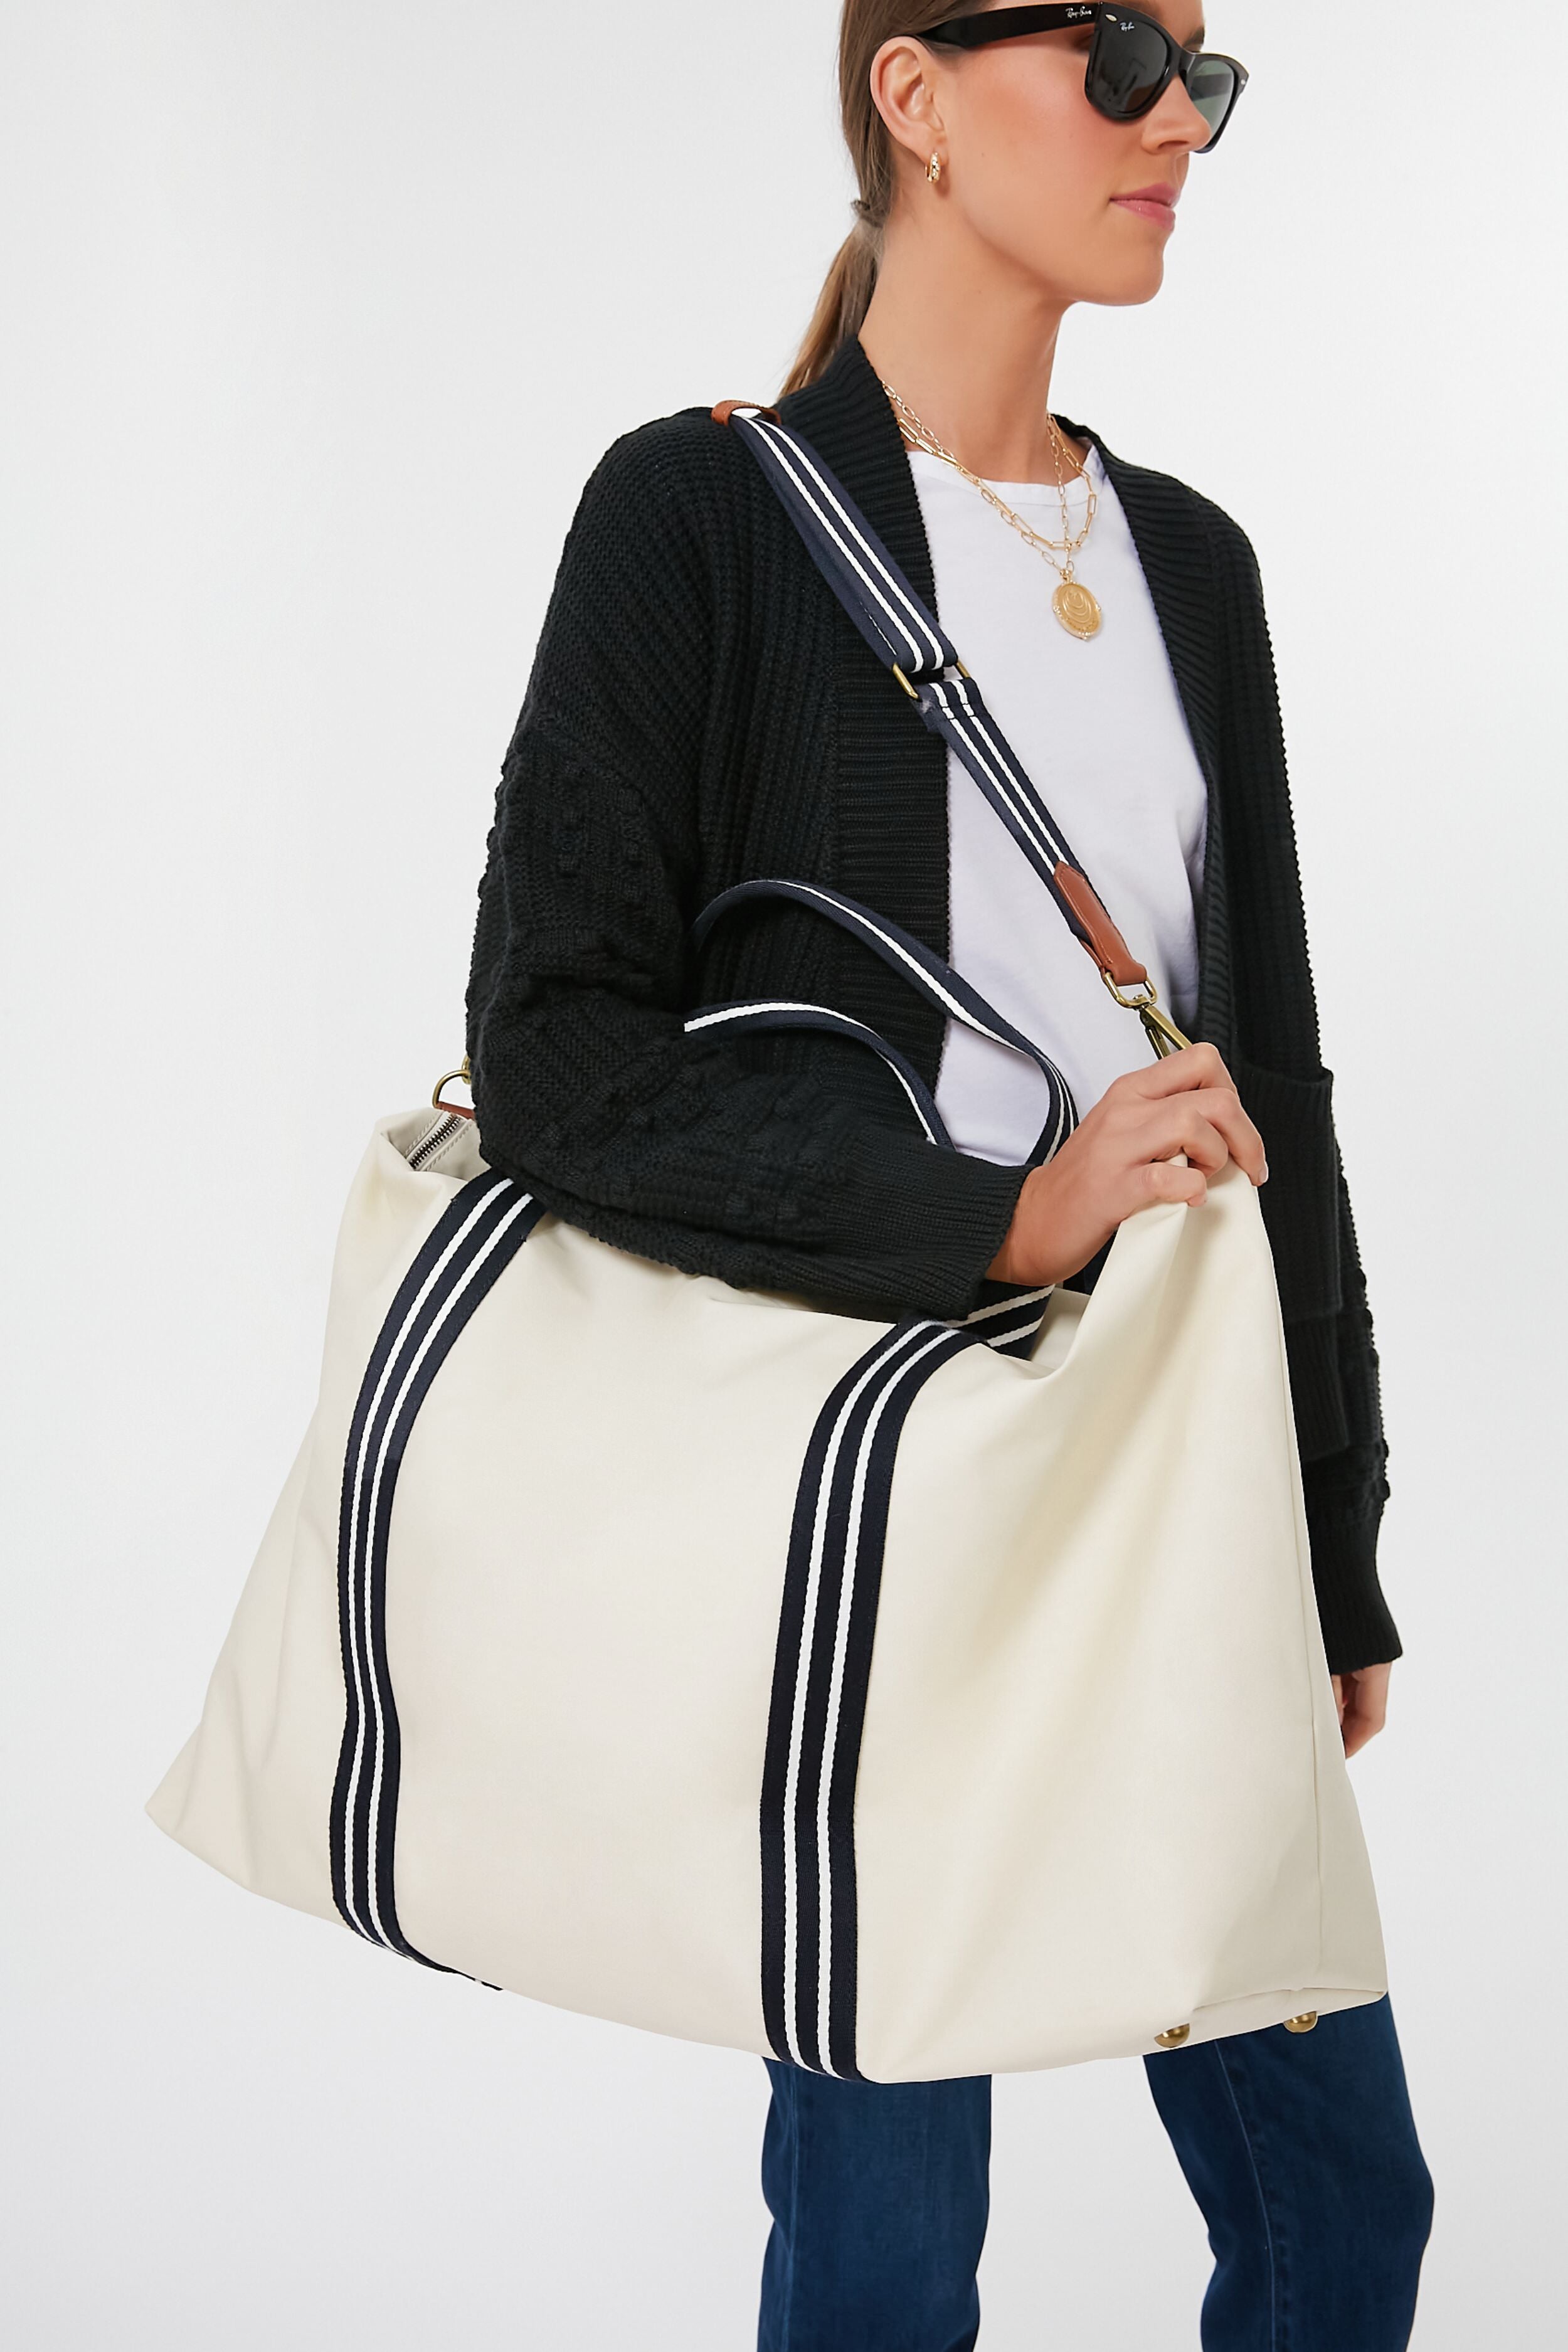 Colette M Zip Coated canvas Tote bag